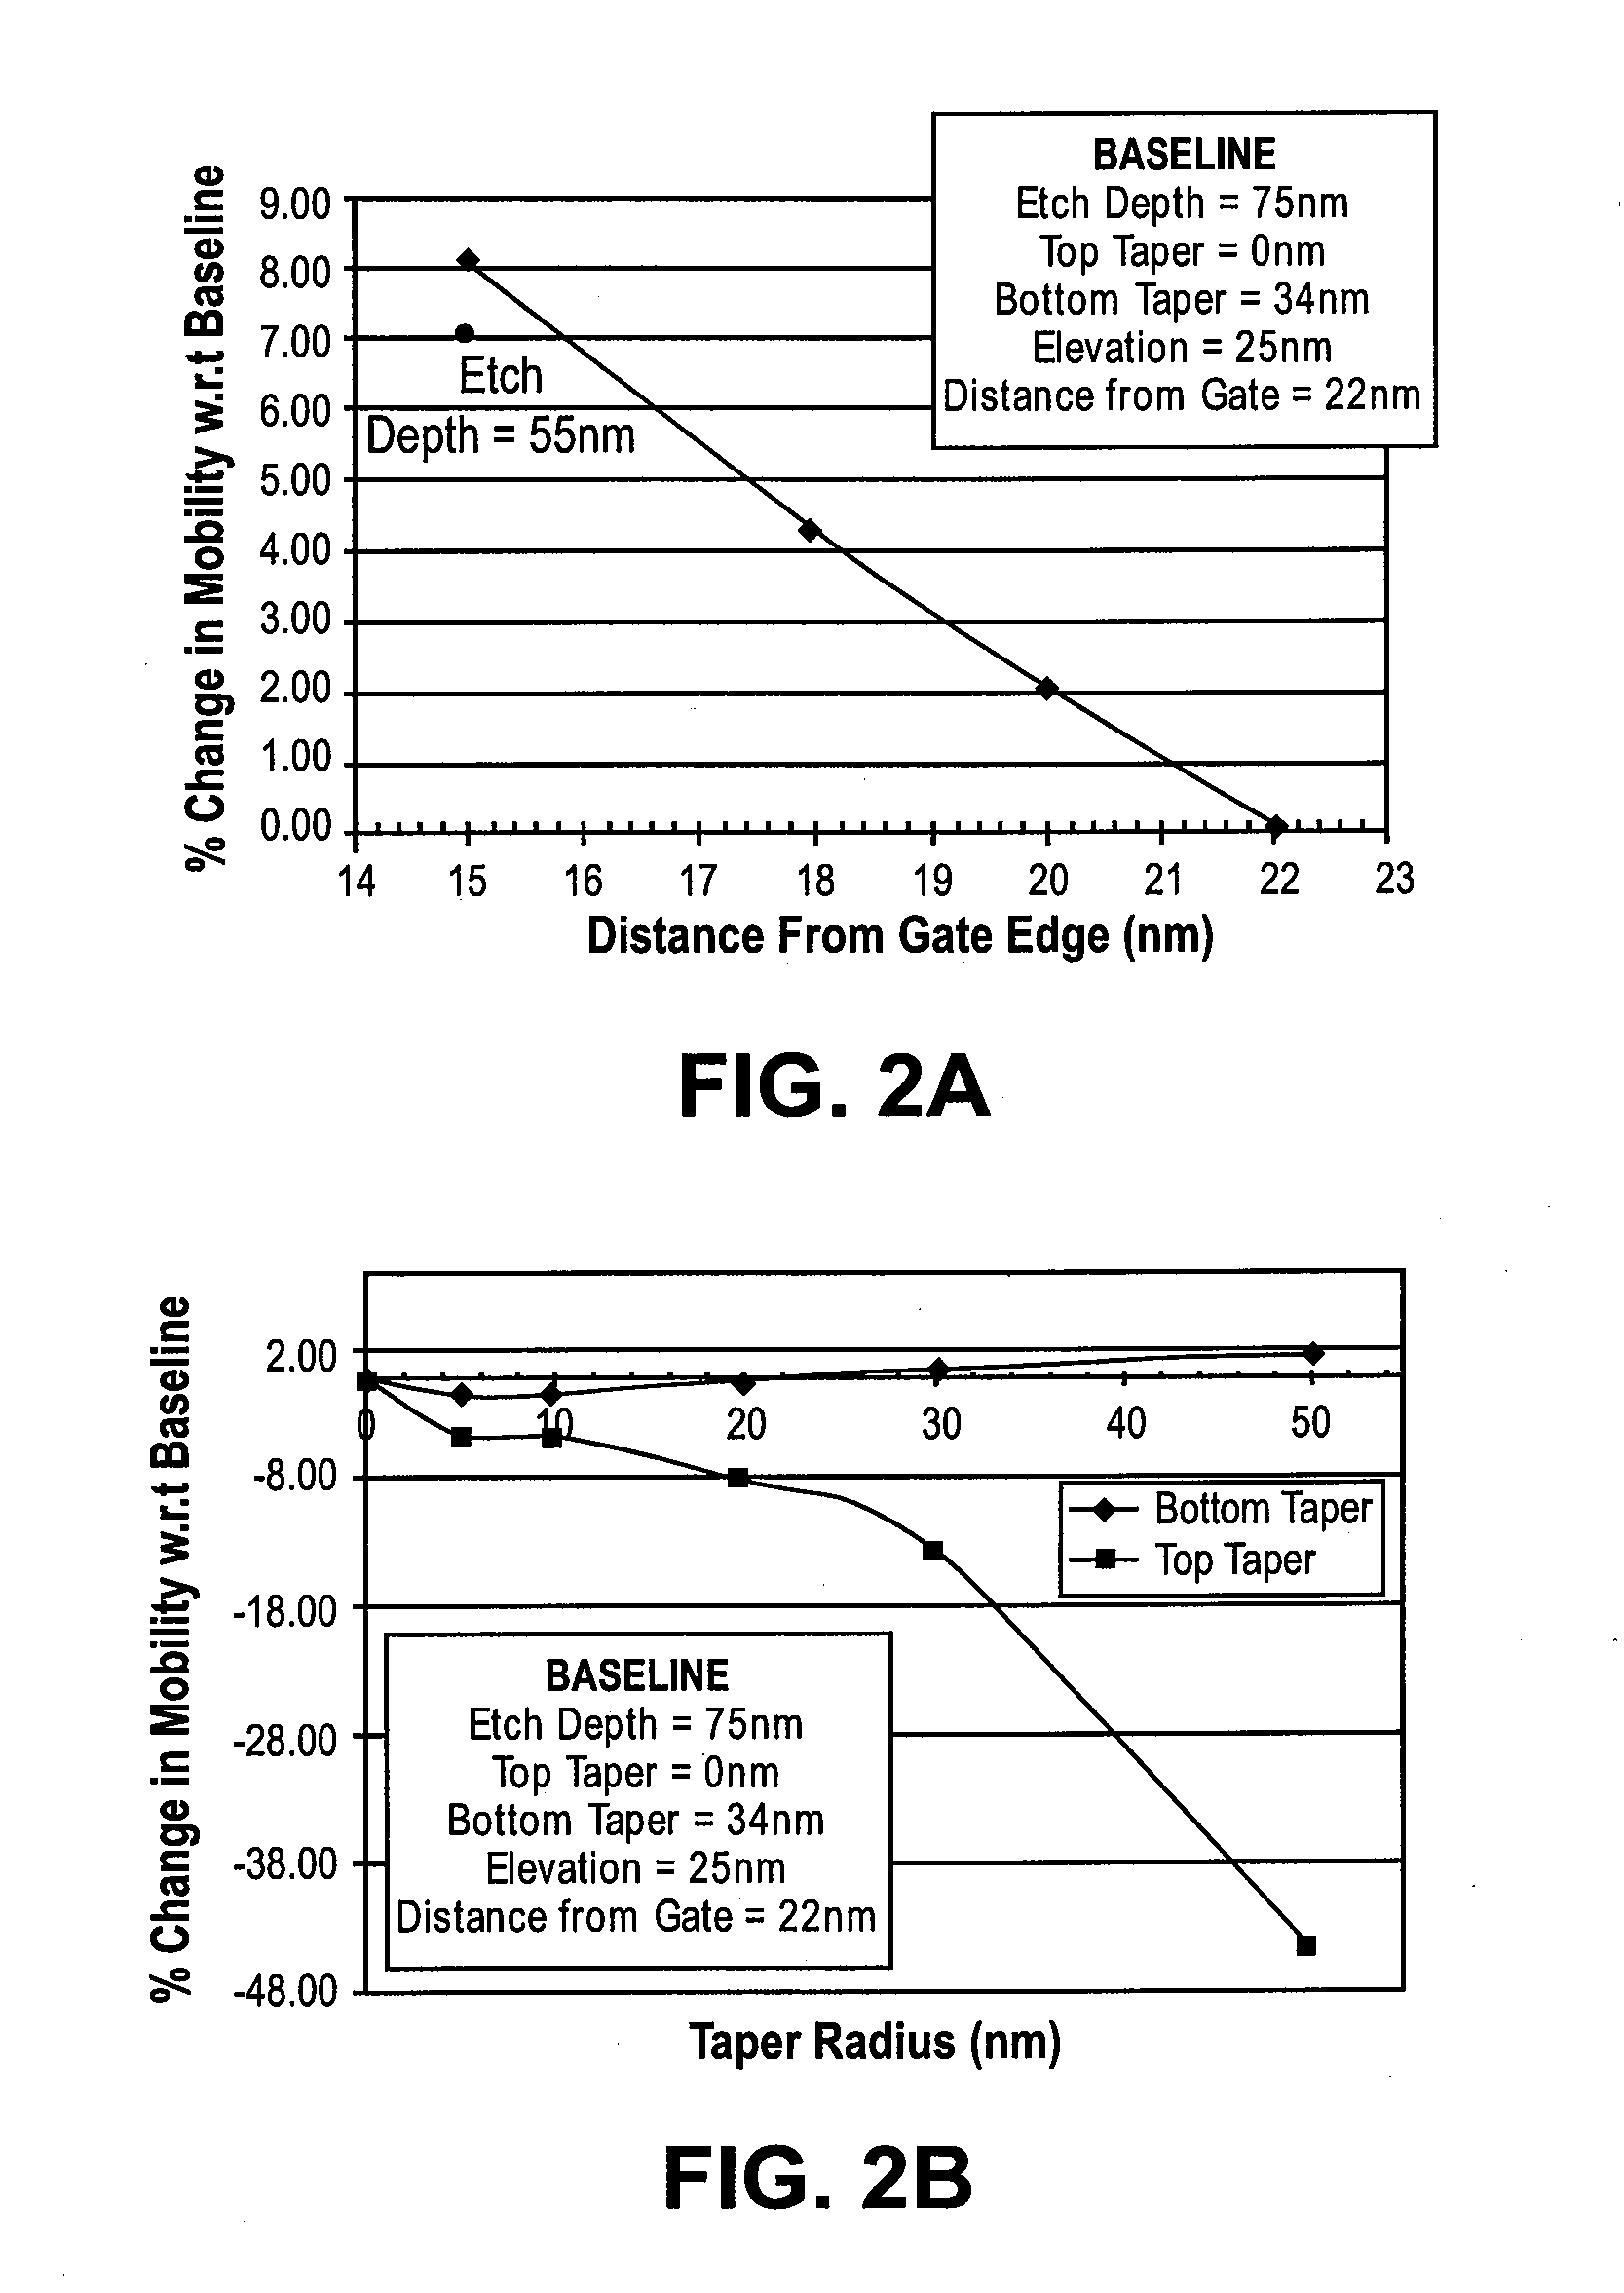 Method and apparatus for tunable isotropic recess etching of silicon materials